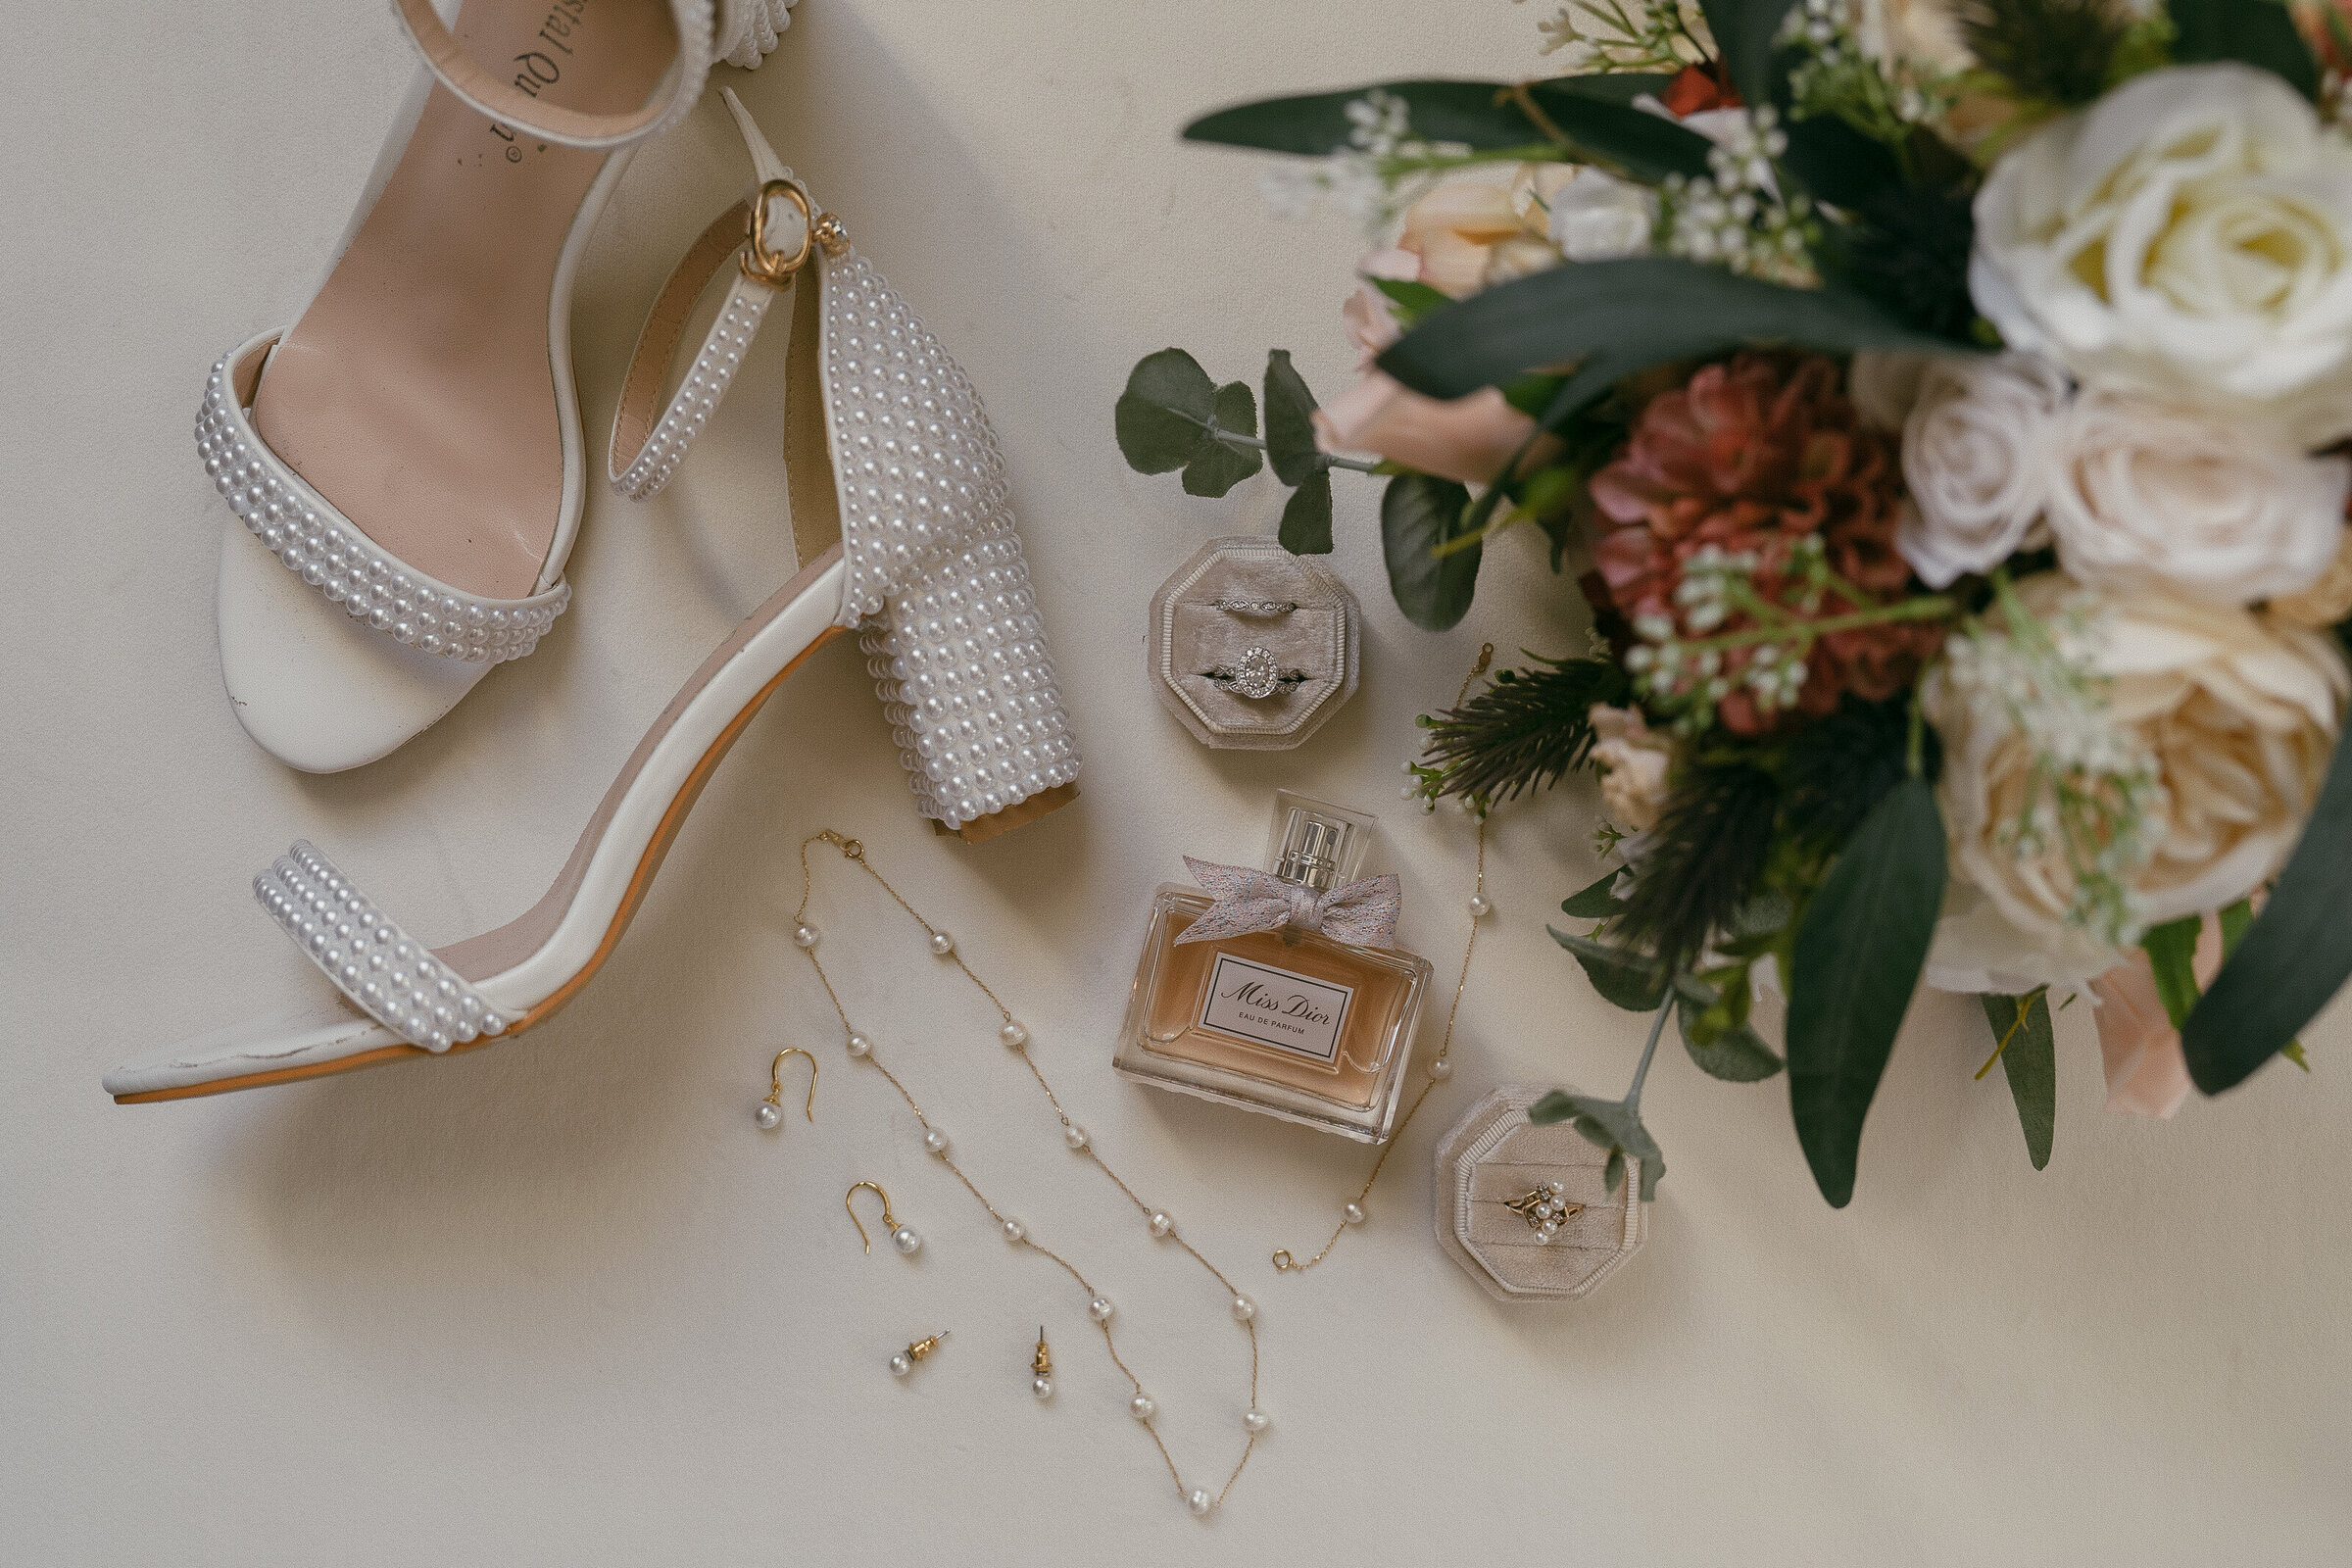 Bridal shoes and handbag decorated with pearls, wedding ring in a box, beside a bouquet.